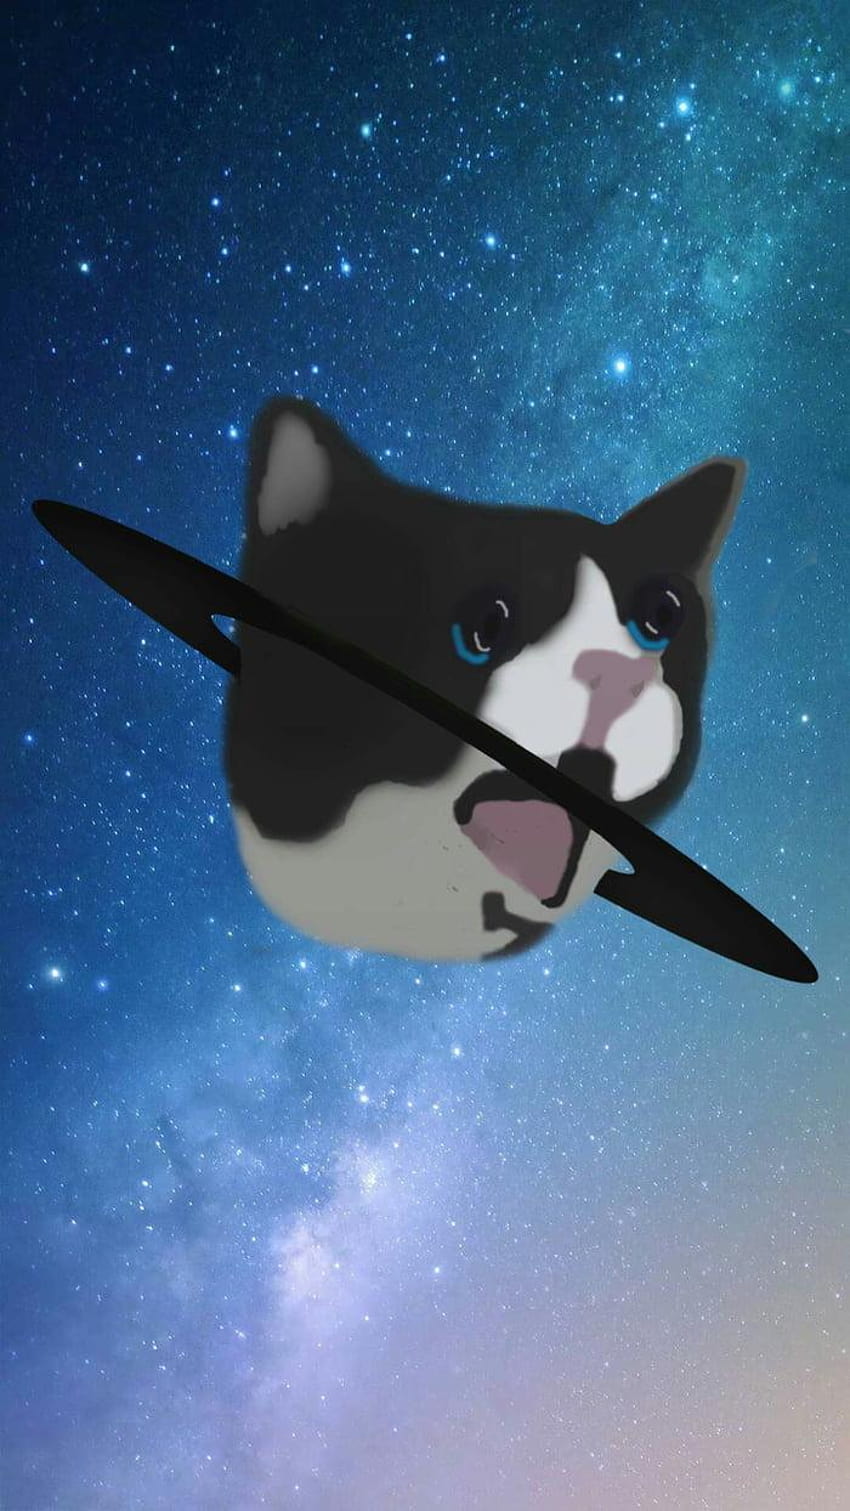 As requested by a comment here's a crying cat meme HD phone wallpaper